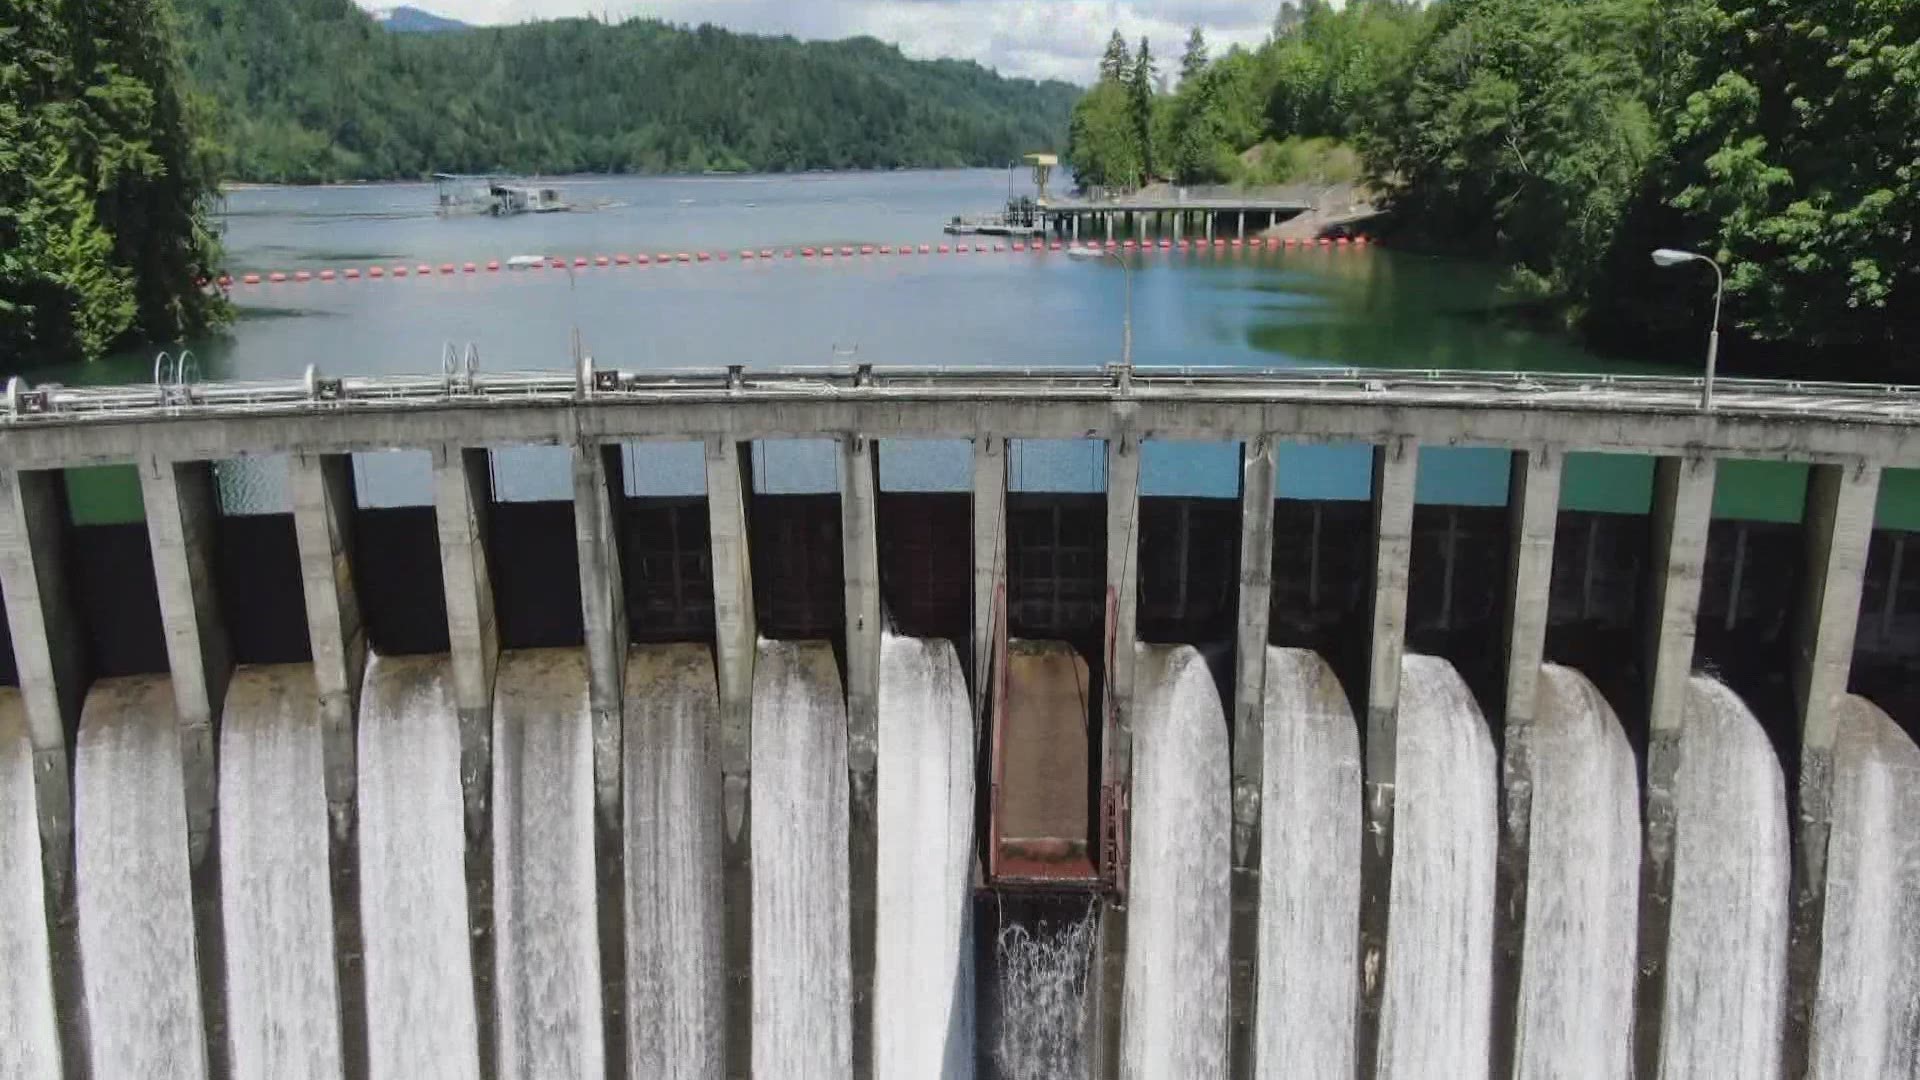 Stakeholders say Seattle City Light could learn from another utility, Puget Sound Energy, on how to better admit impacts for their dams and find solutions.